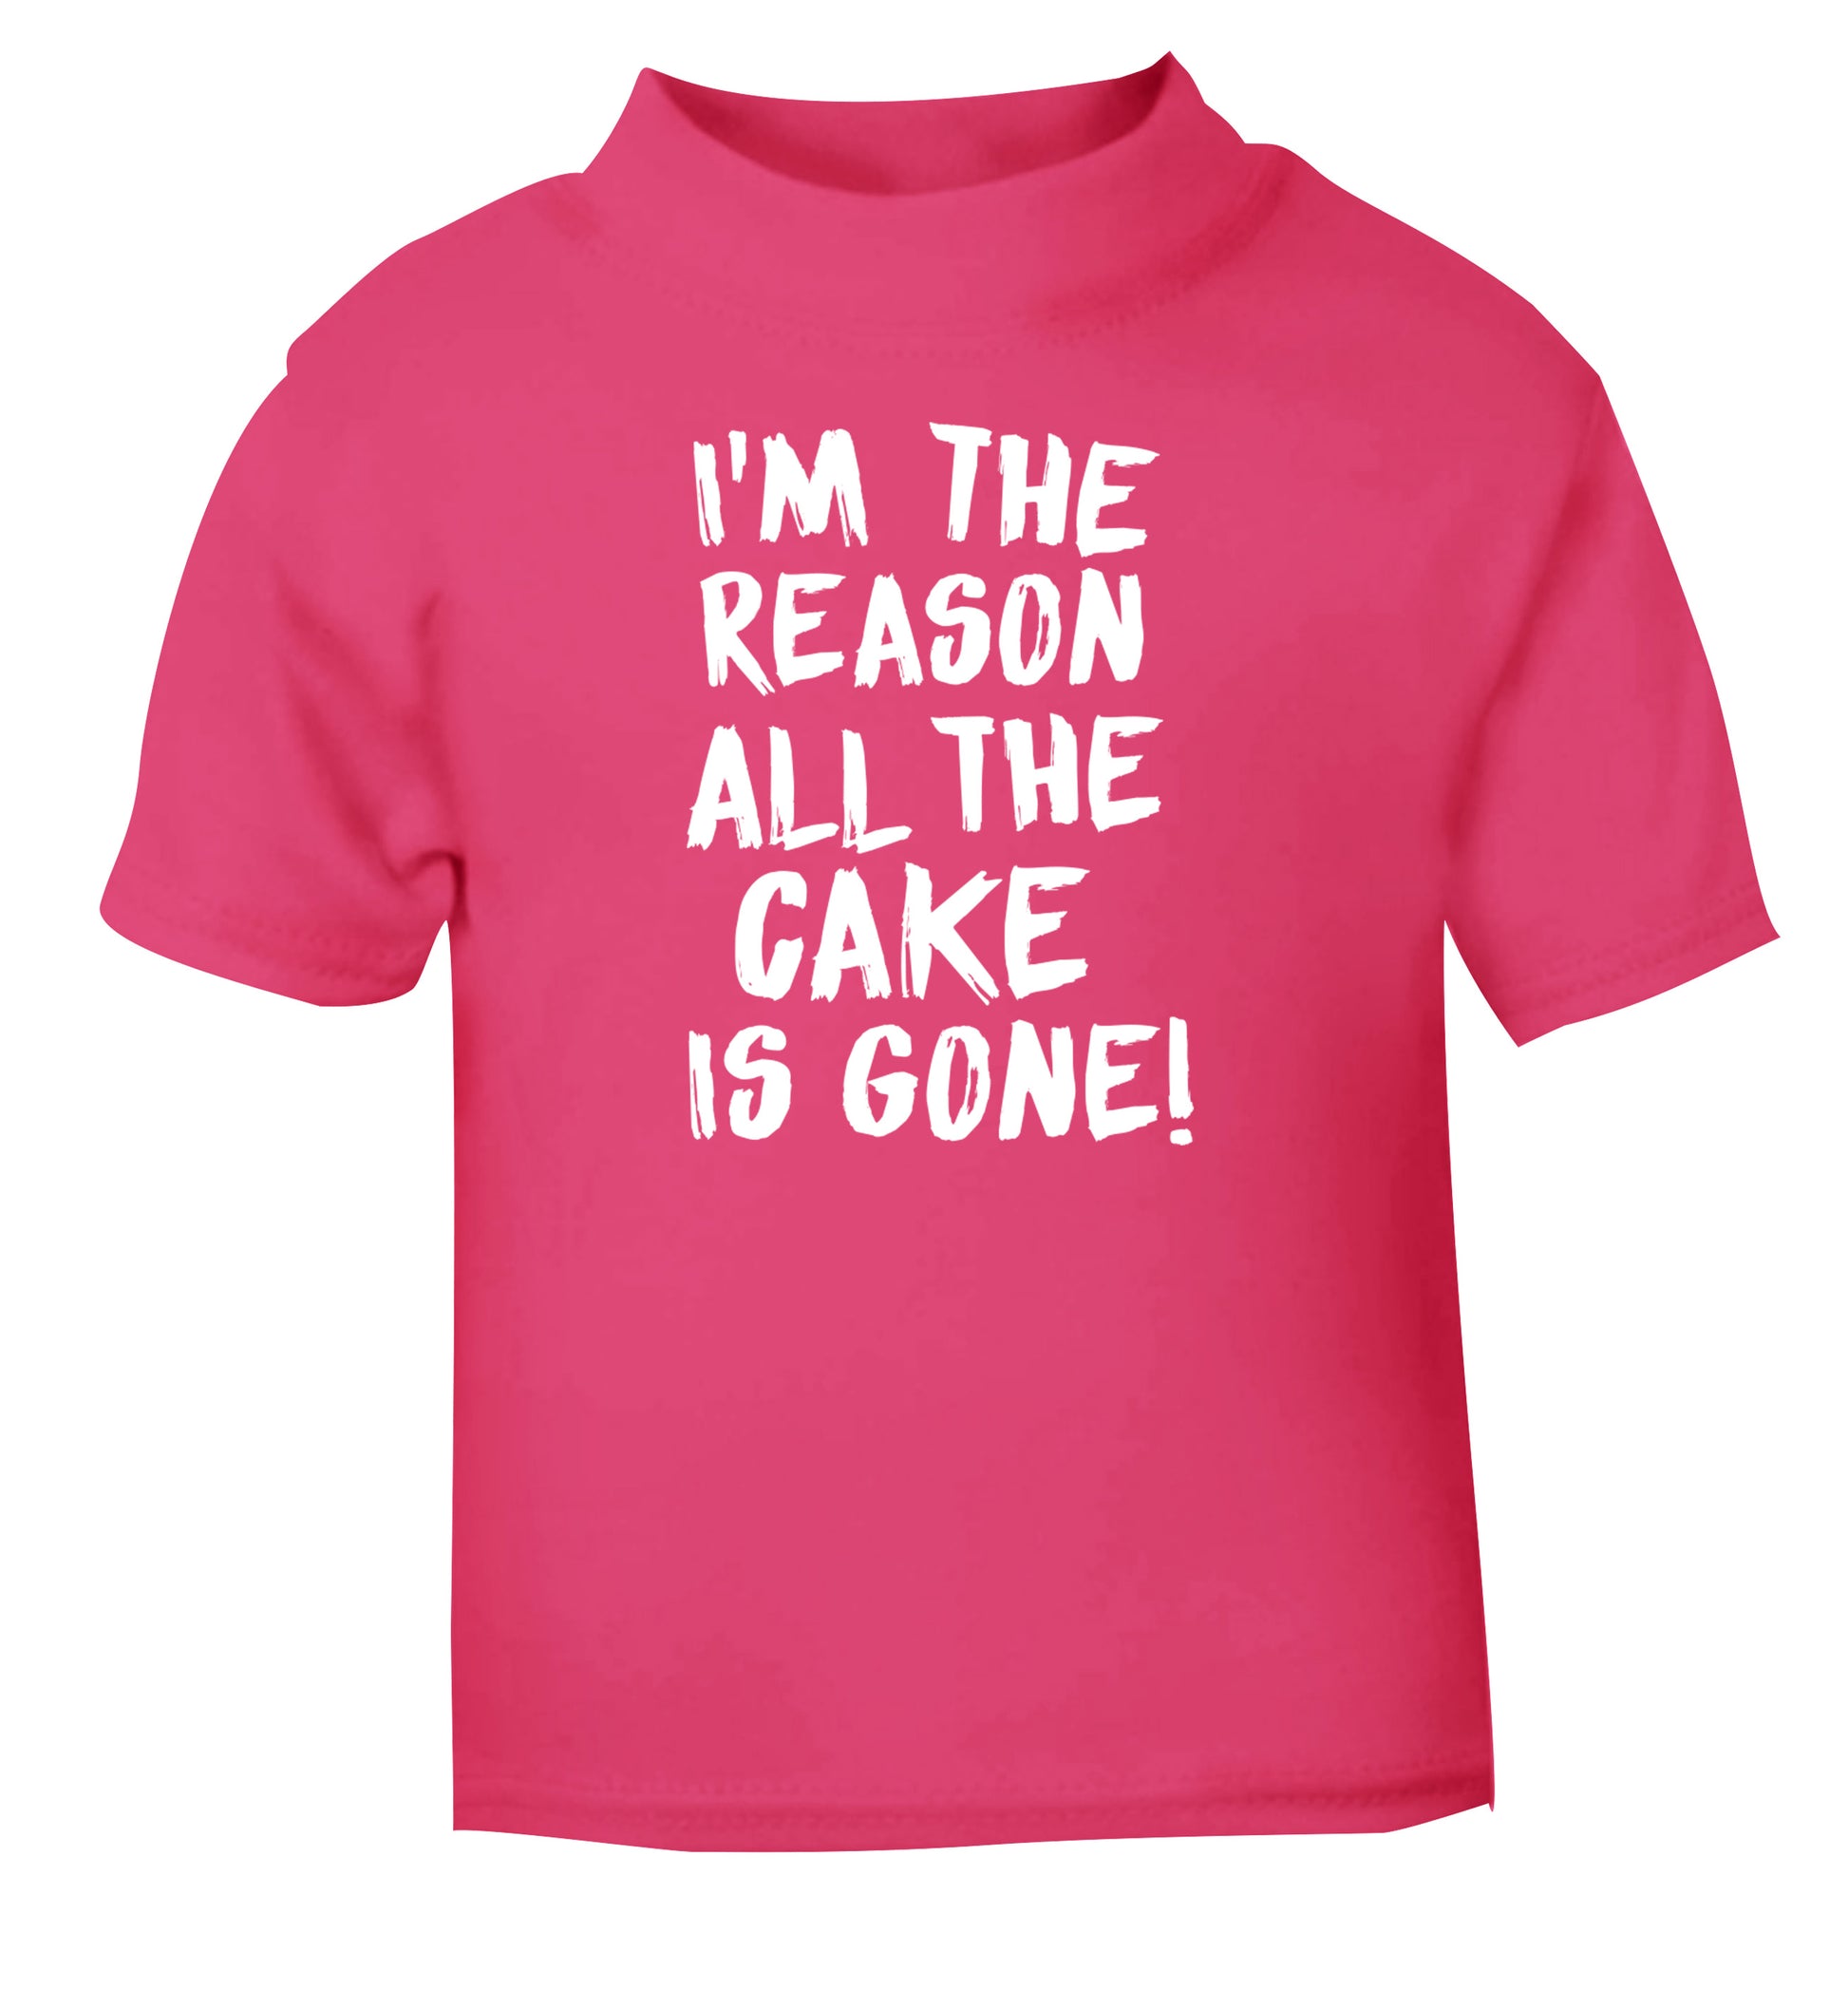 I'm the reason all the cake is gone pink Baby Toddler Tshirt 2 Years